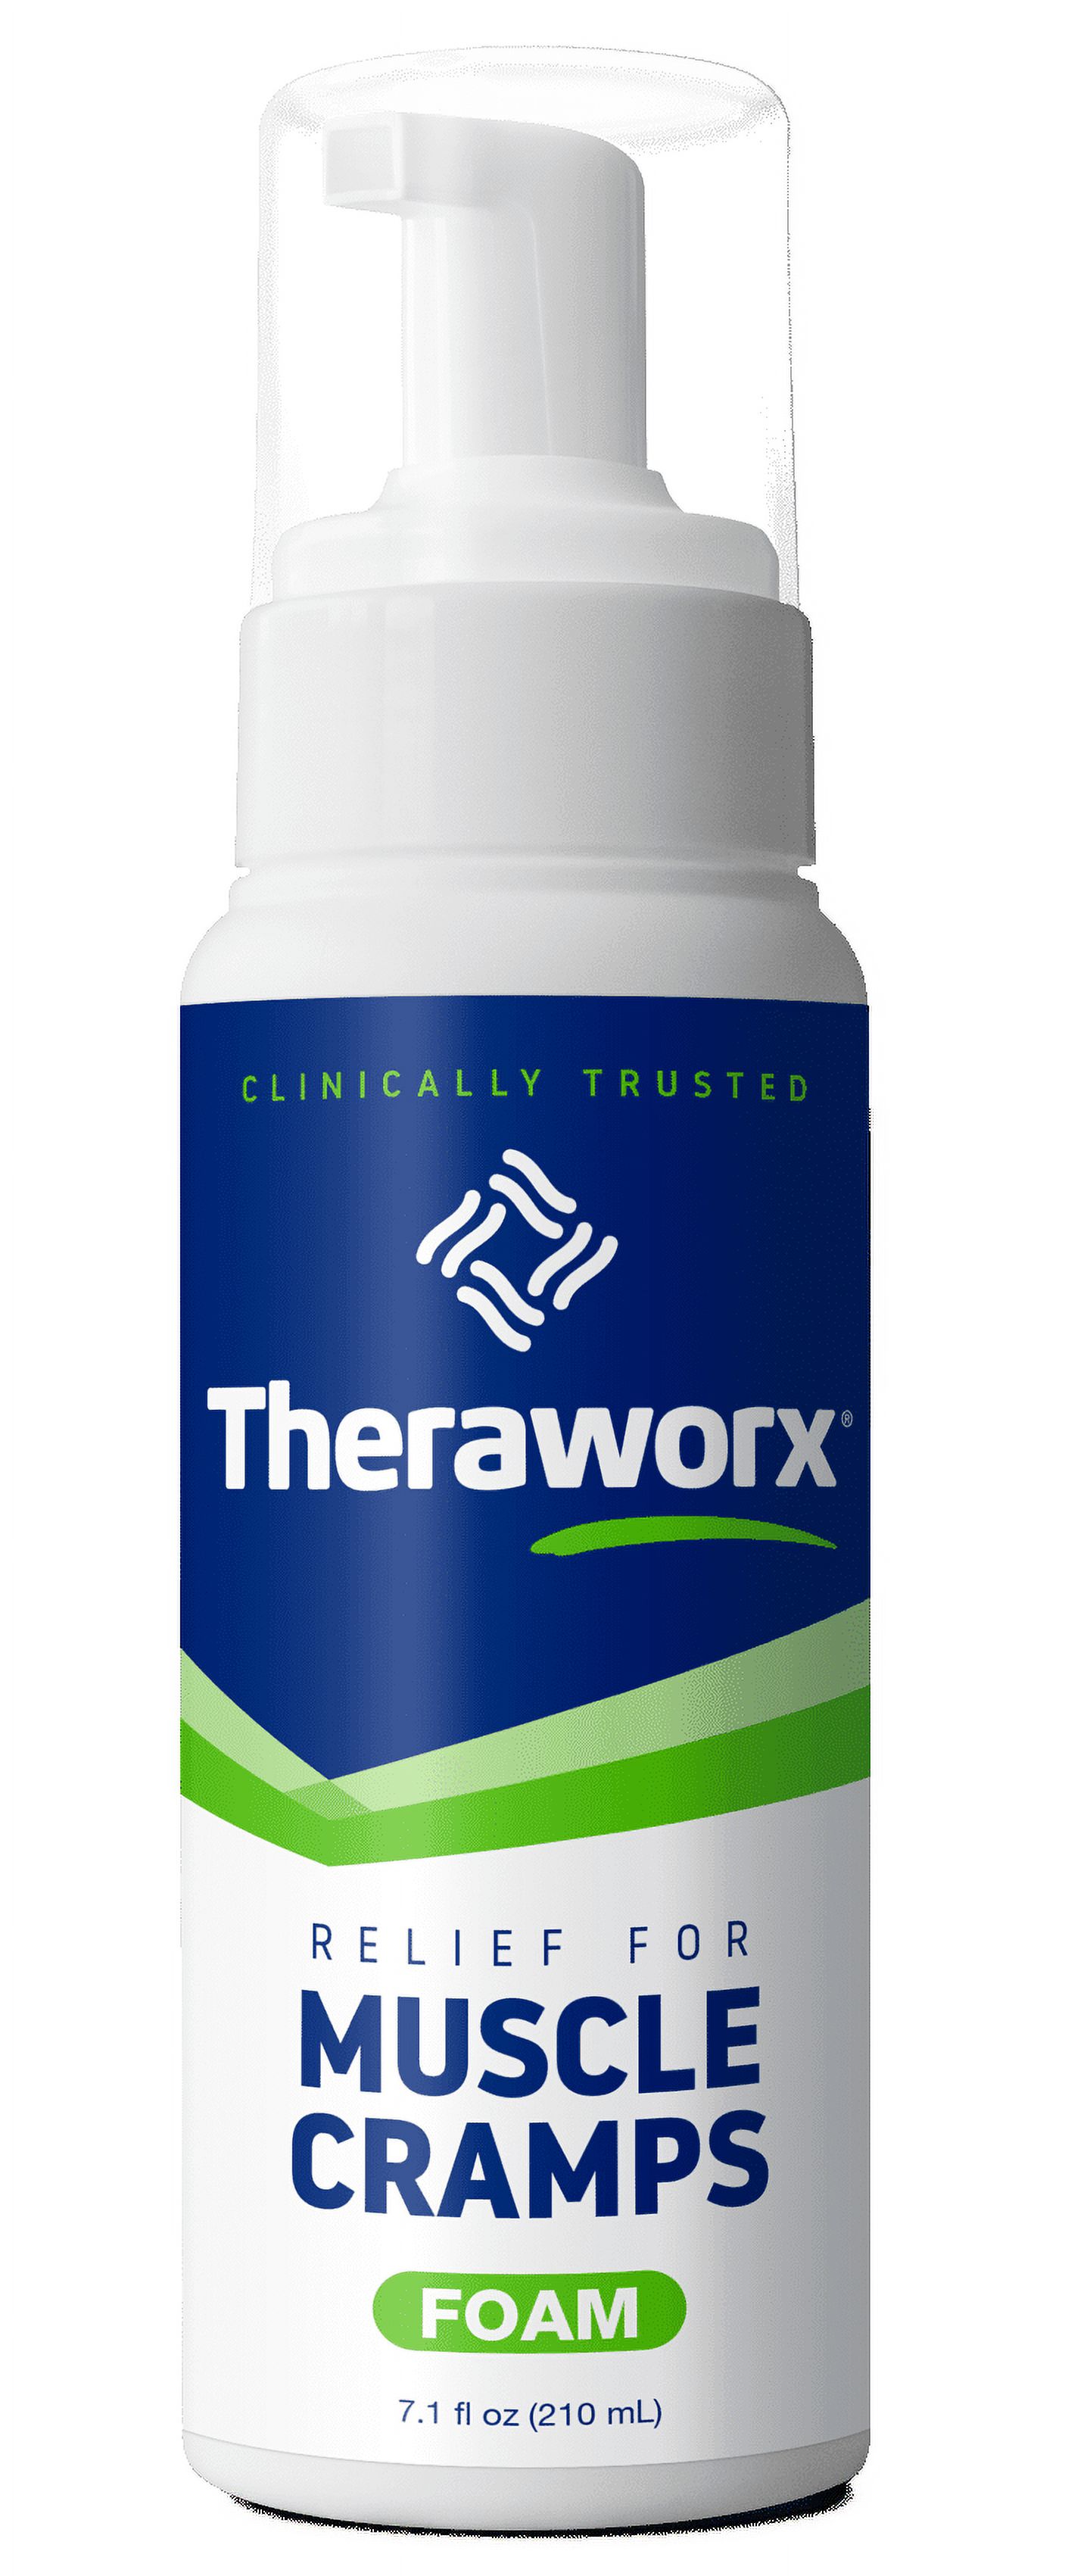 Theraworx for Muscle Cramps Spray, for Muscle Cramps, Spasms, and Post-Cramp Soreness, 7.1 oz - image 2 of 2